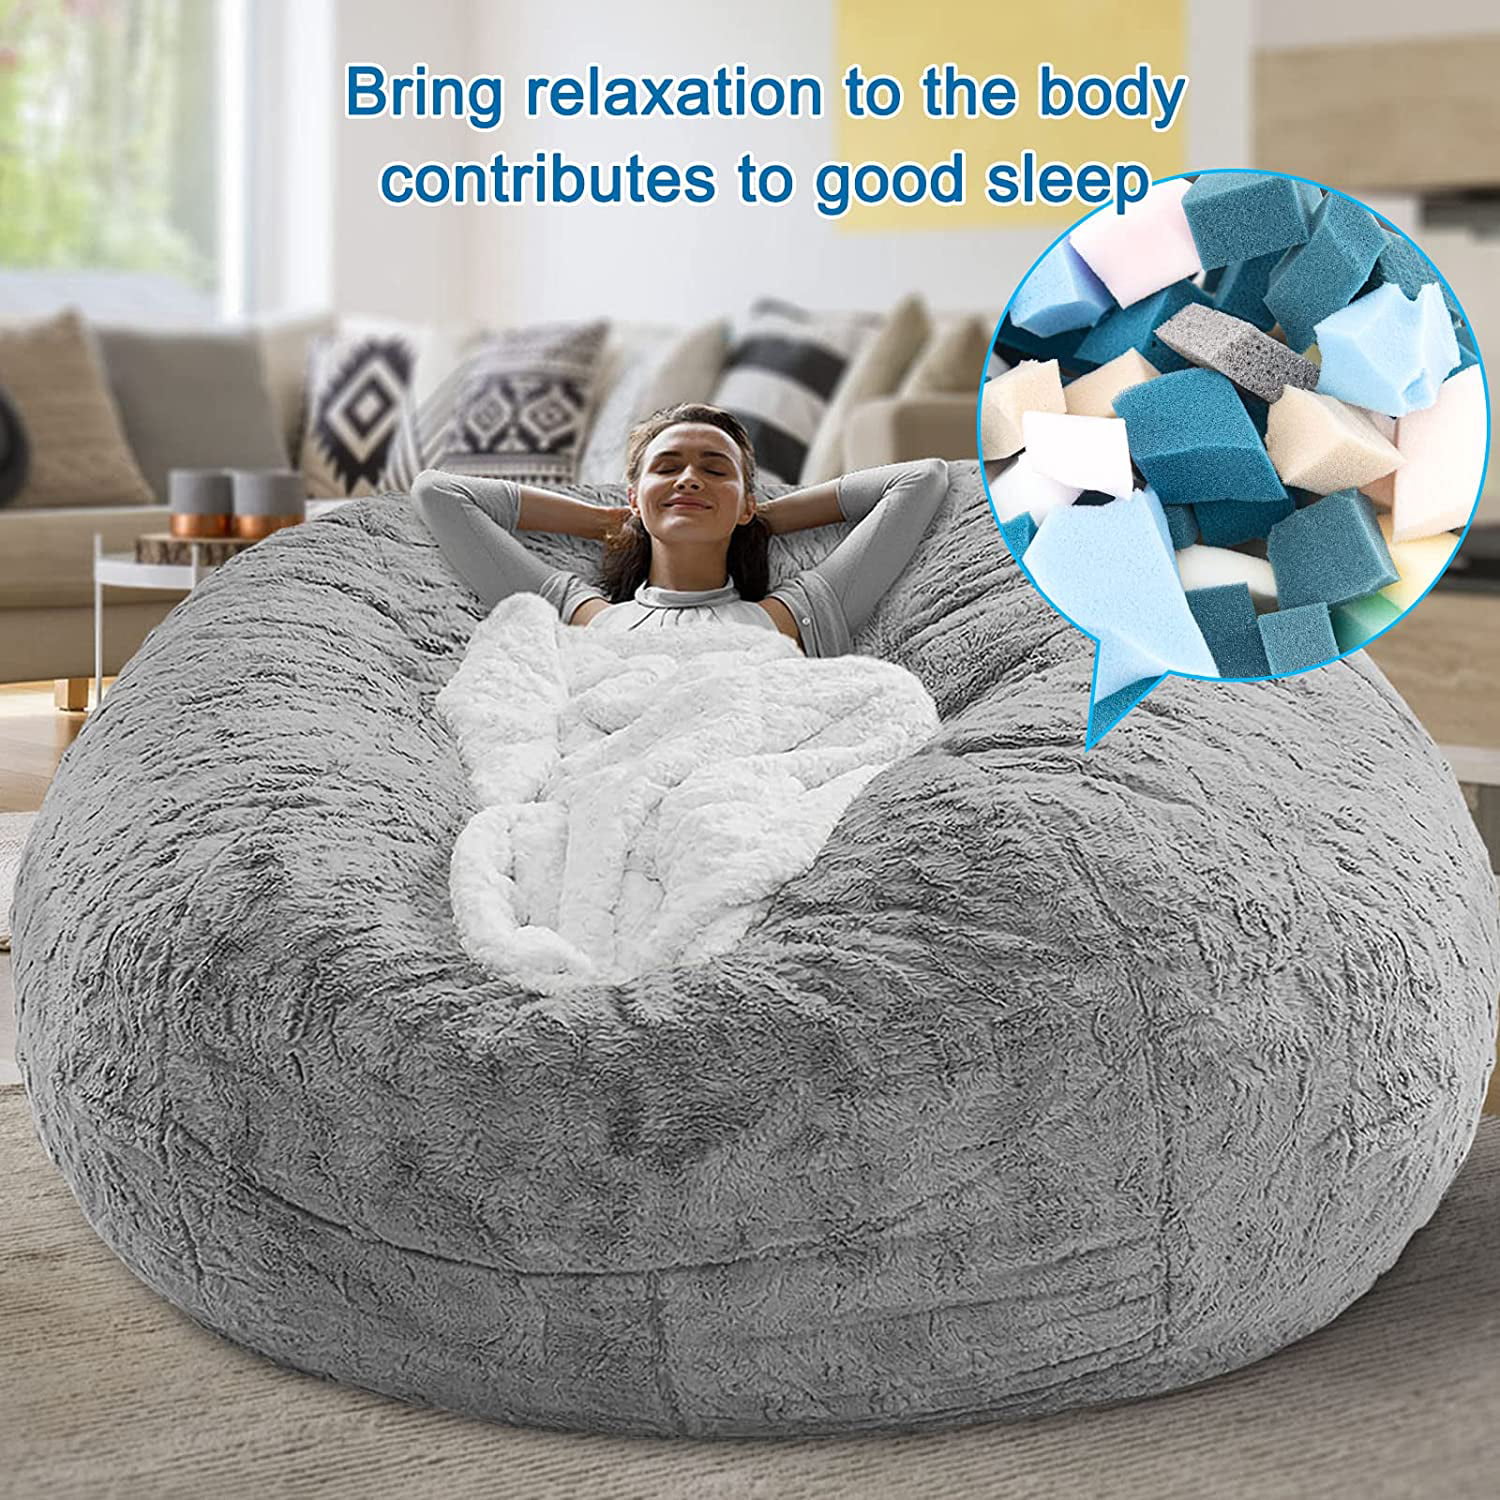 RAINBEAN Bean Bag Chair Filler, 60lb Filling Shredded Memory Foam with  Inner Liner,Easy to Install and Remove,High Elastic Density - Safe and